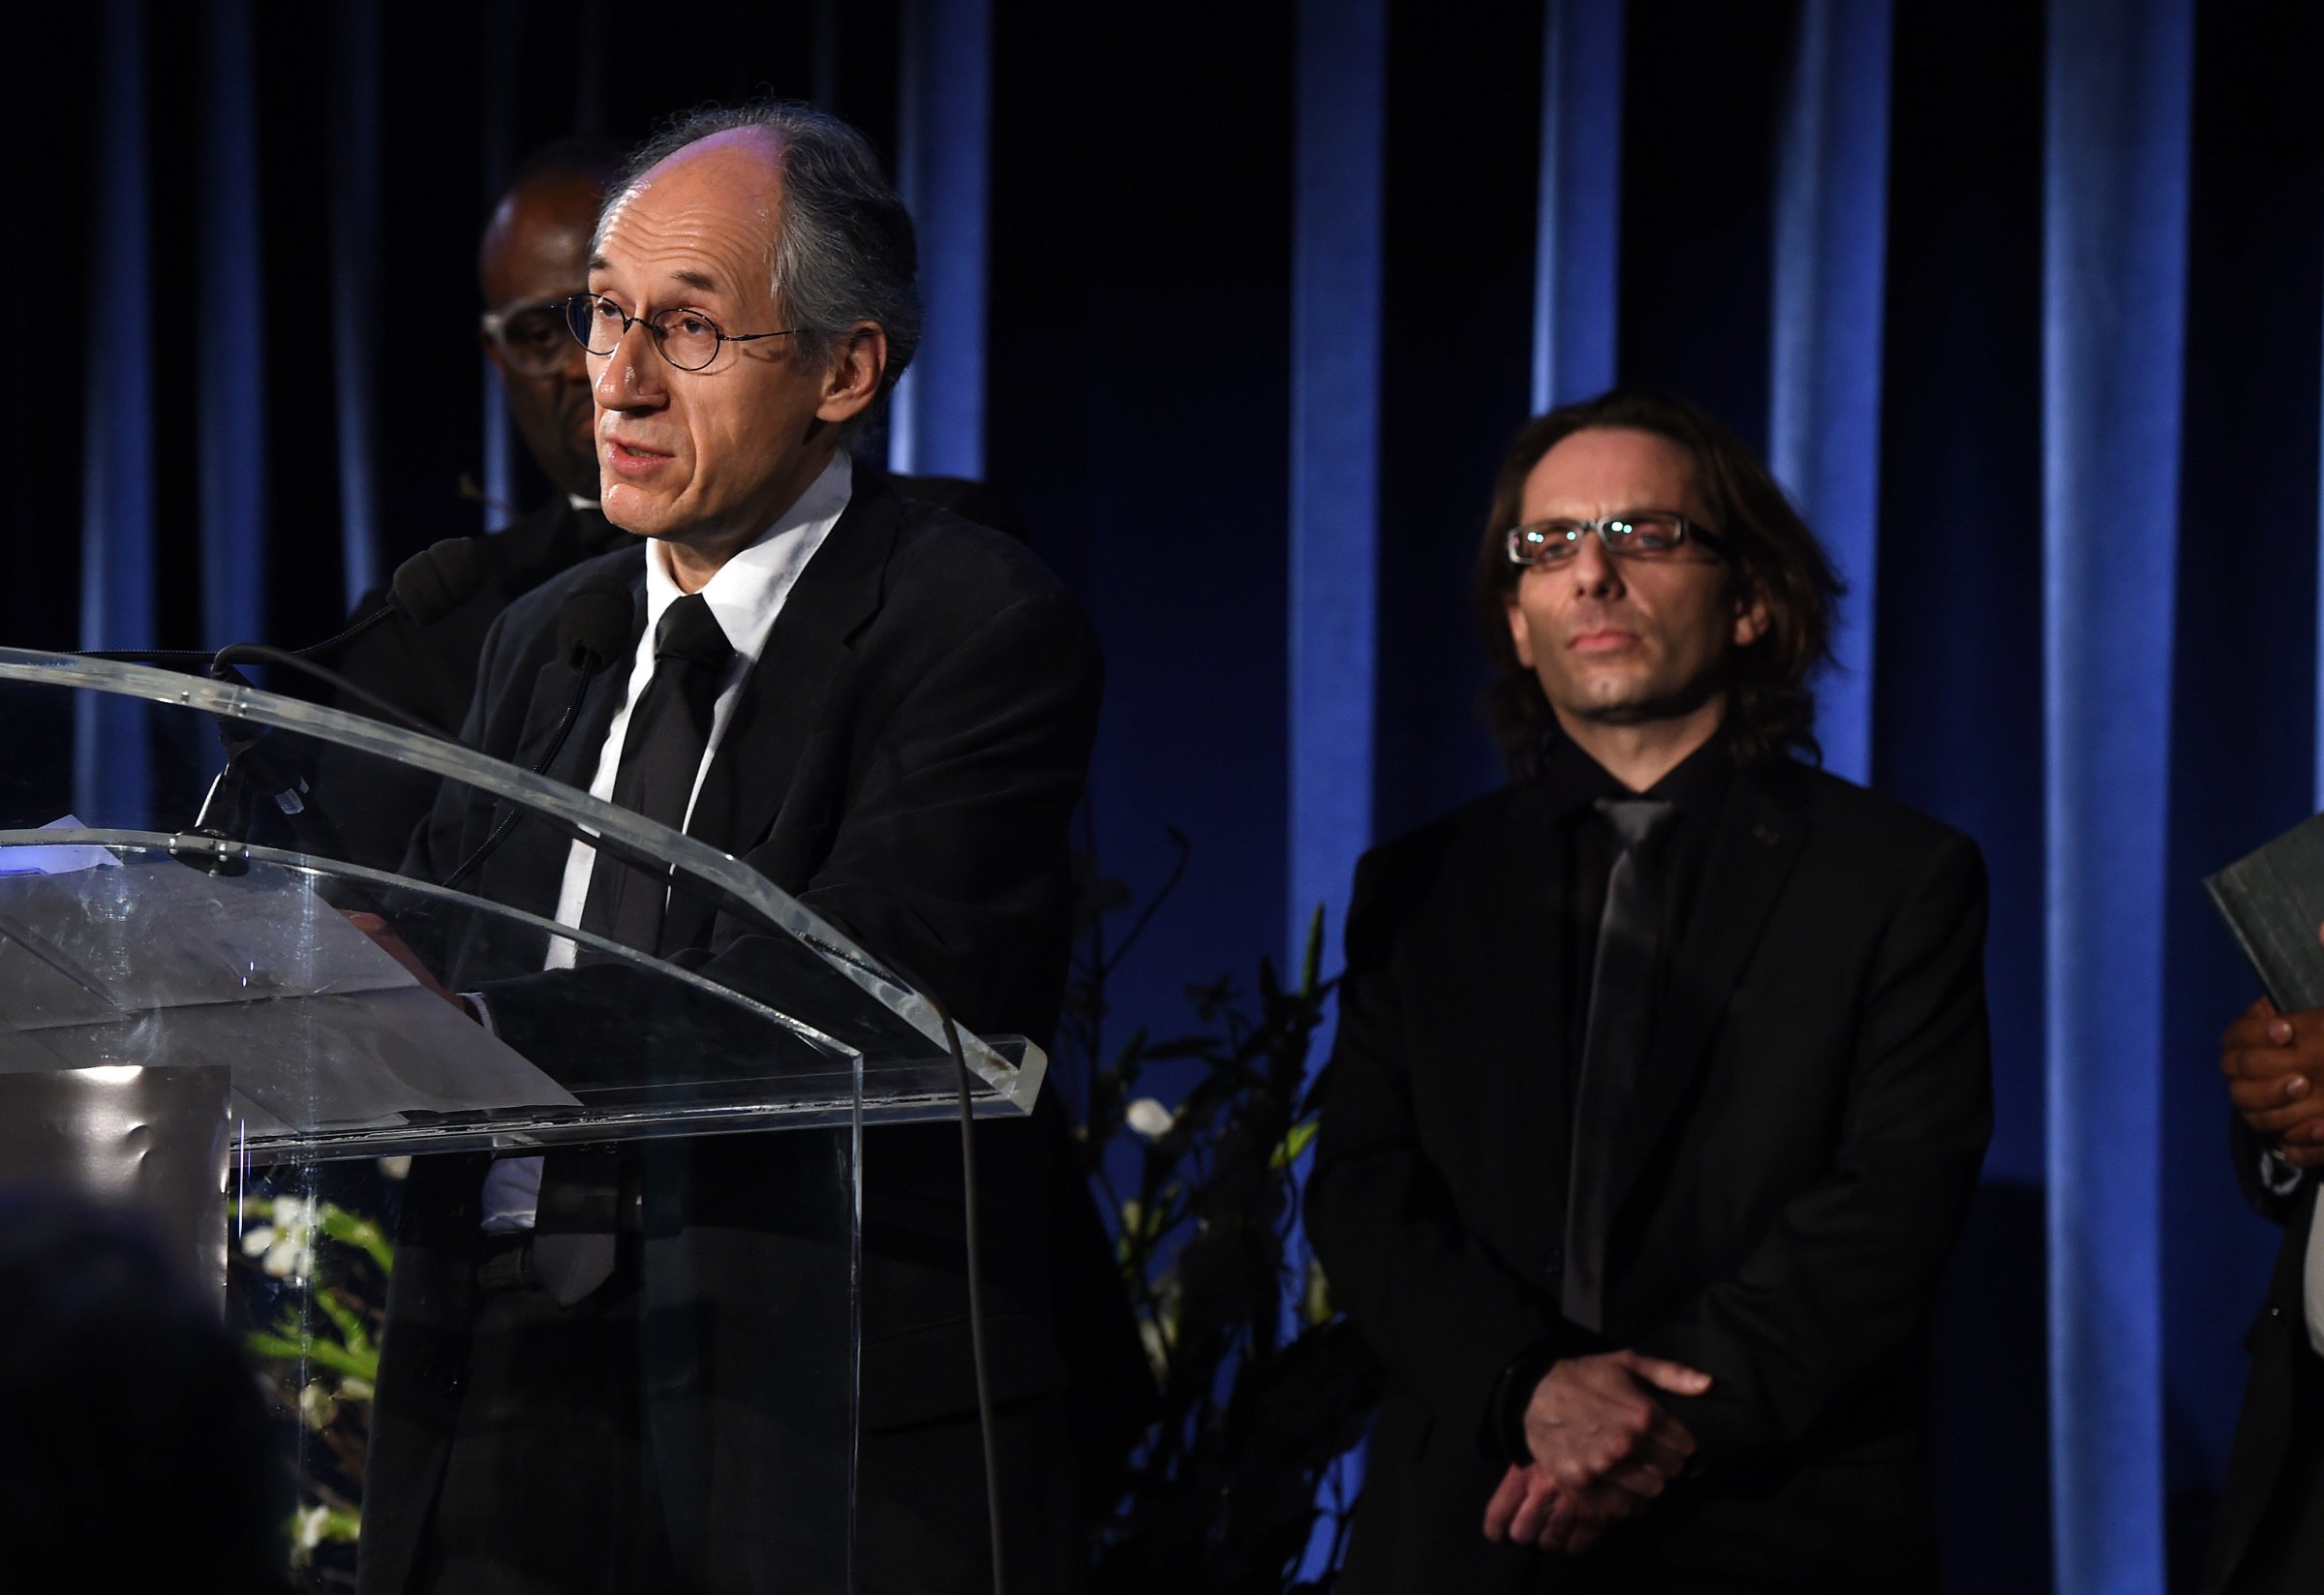 Gerard Biard (L), editor-in-chief of the Paris-based satirical weekly Charlie Hebdo, speaks before critic Jean-Baptiste Thoret (R) during the annual PEN American Center Literary Gala May 5, 2015 at the American Museum of Natural History in New York.